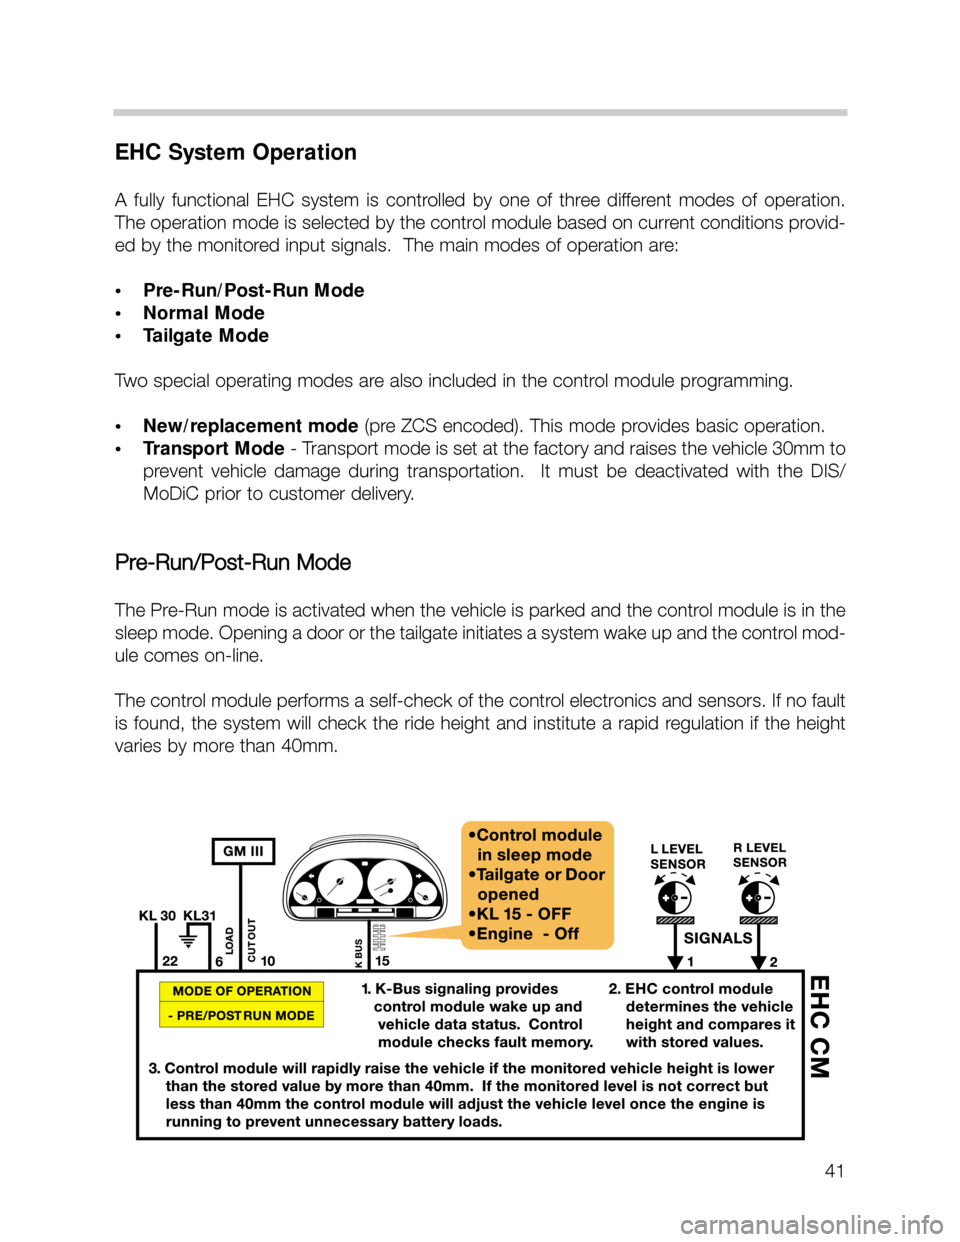 BMW X5 2002 E53 Workshop Manual 41
EHC System Operation
A  fully  functional  EHC  system  is  controlled  by  one  of  three  different  modes  of  operation.
The operation mode is selected by the control module based on current co